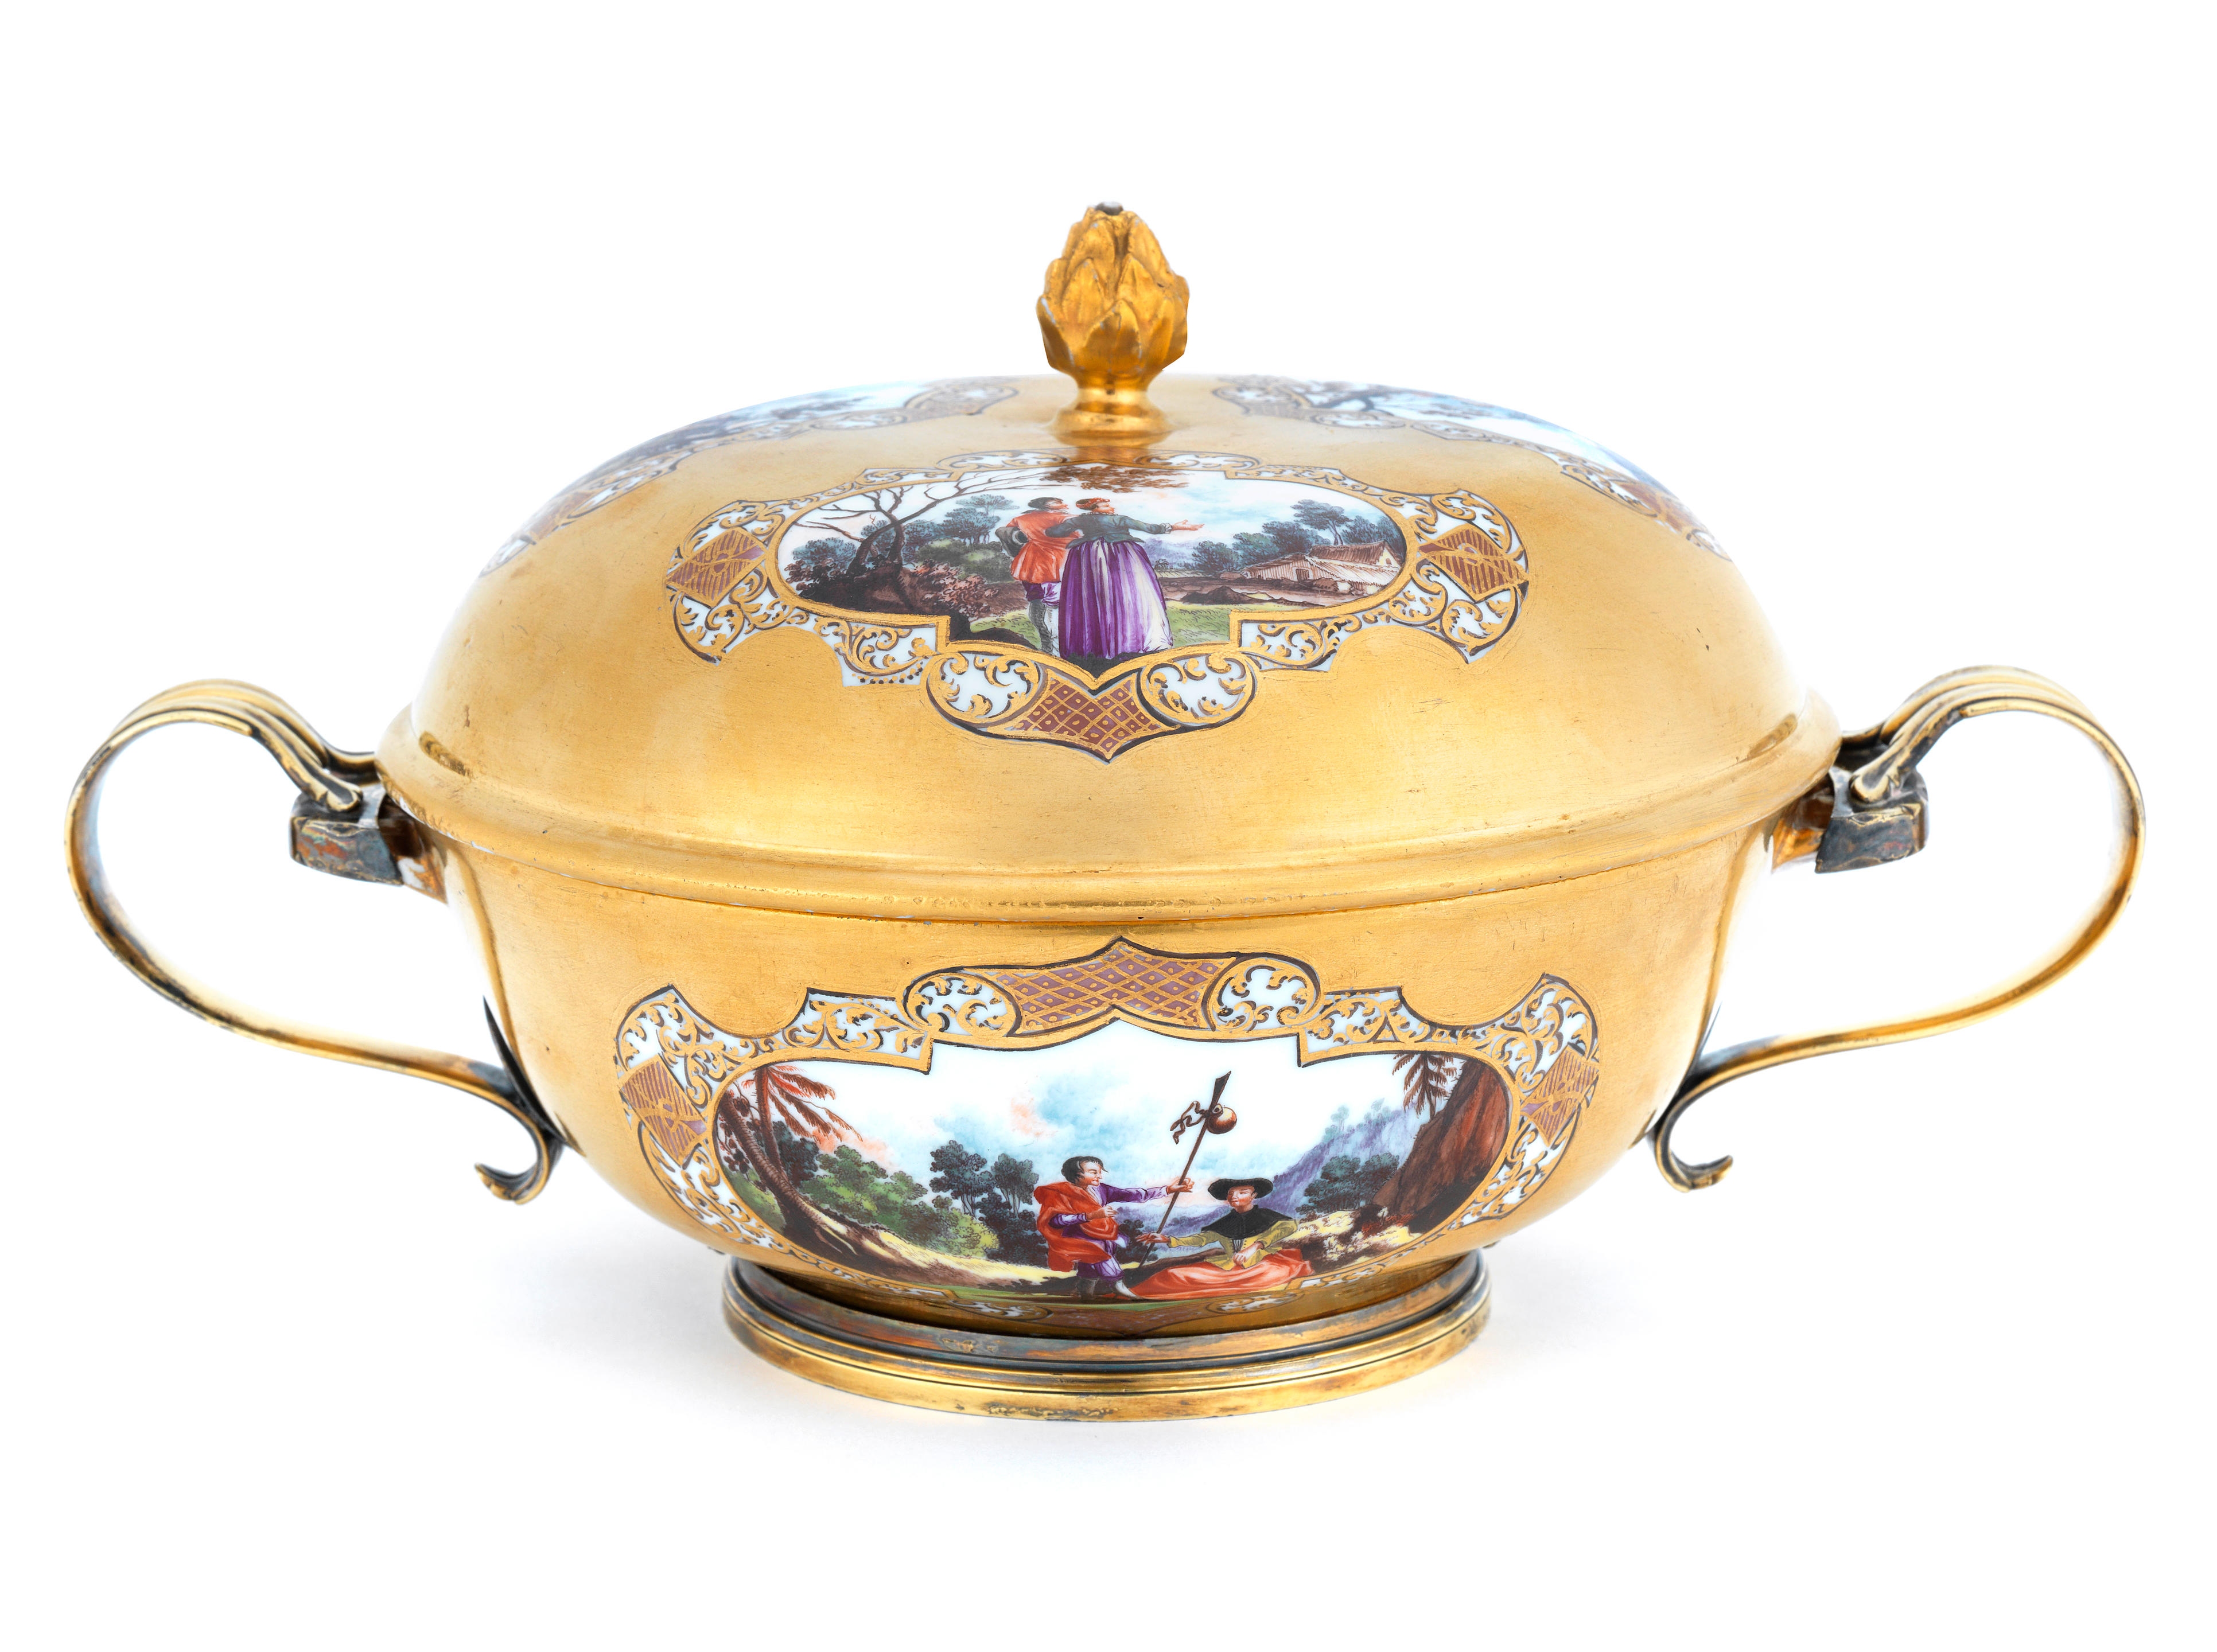 A Meissen gold-ground ecuelle and cover, circa 1735-40